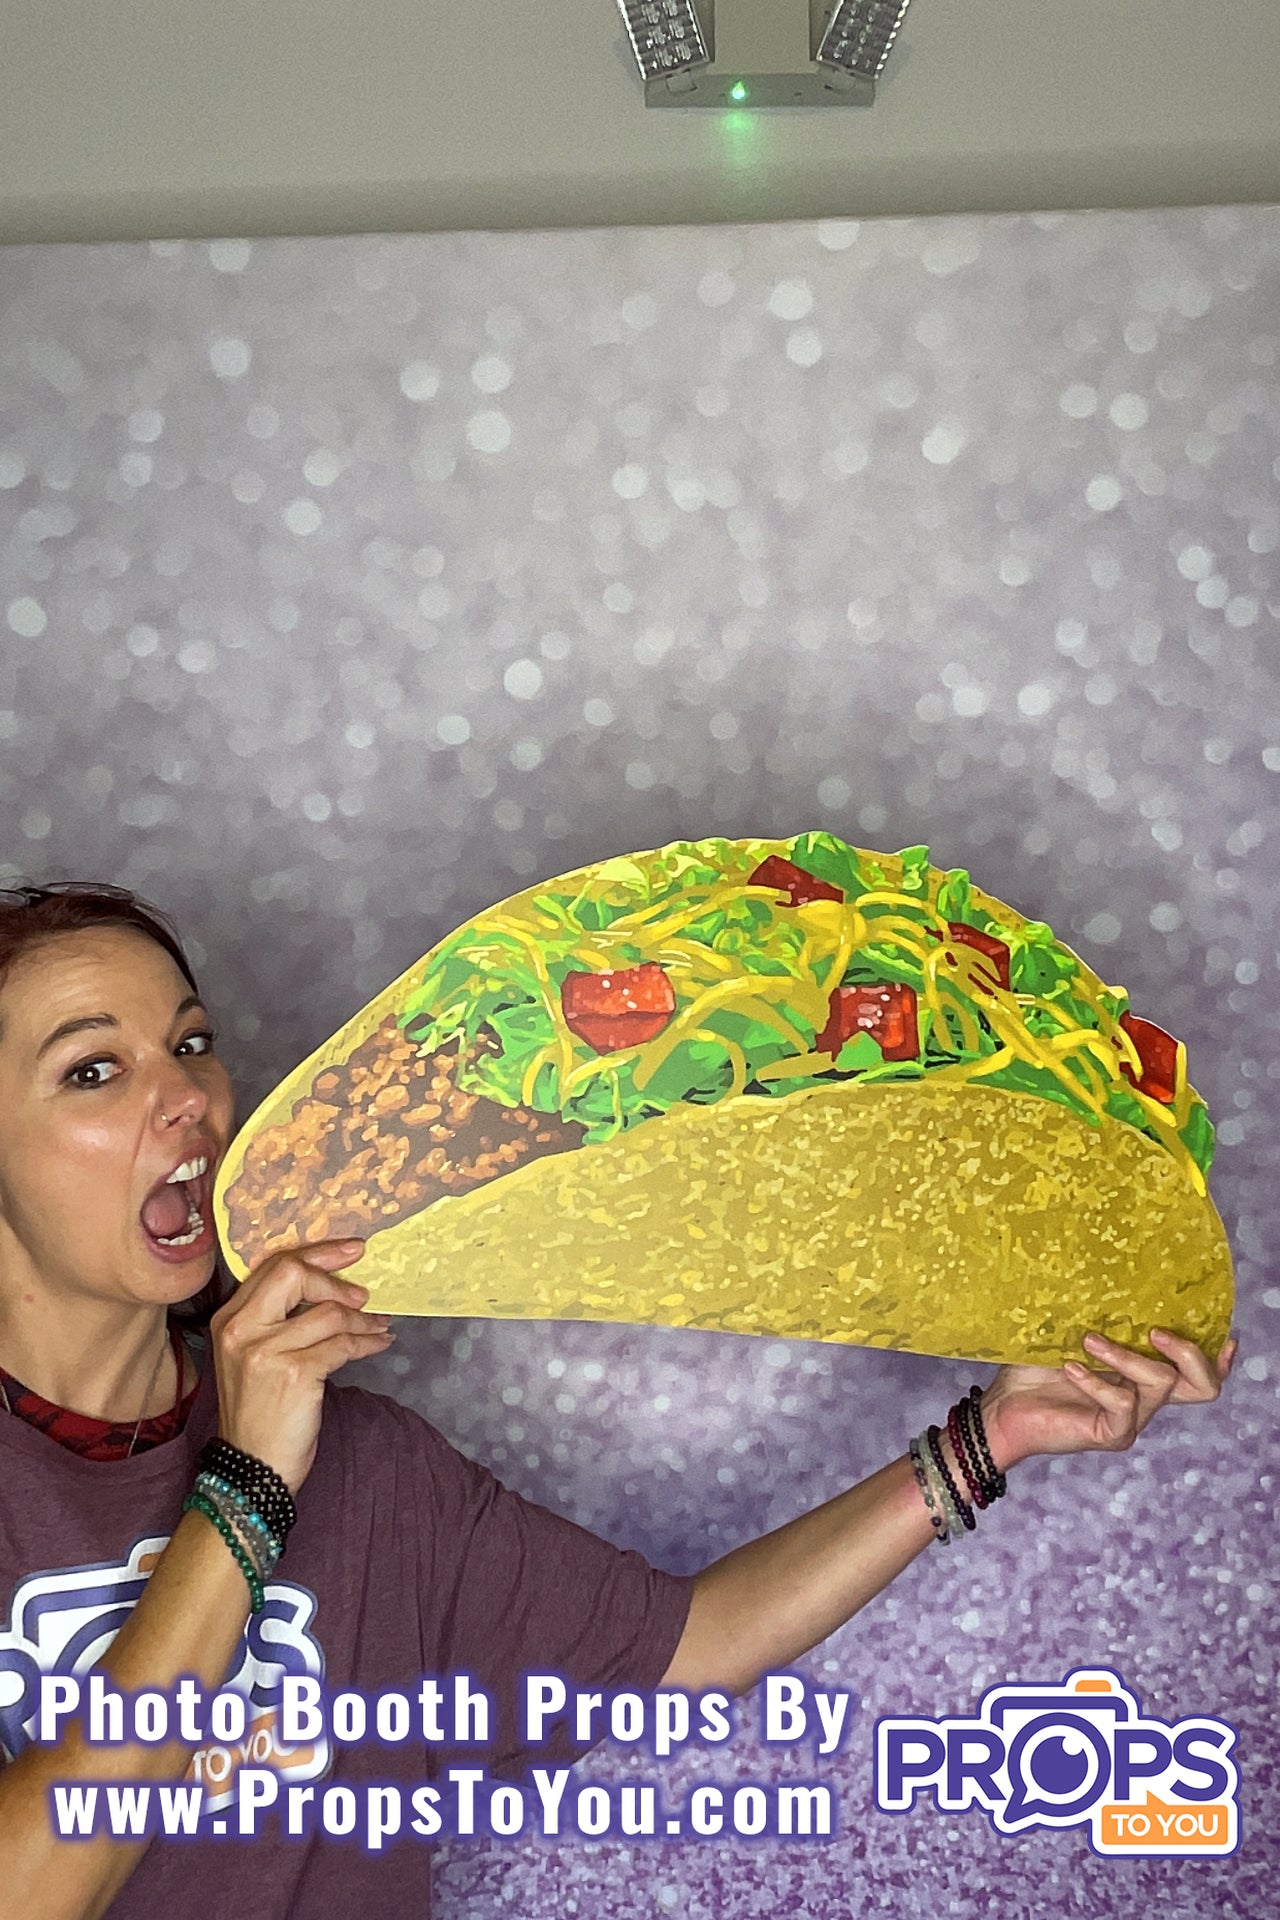 BIG Props: American/Traditional Taco Photo Booth Prop